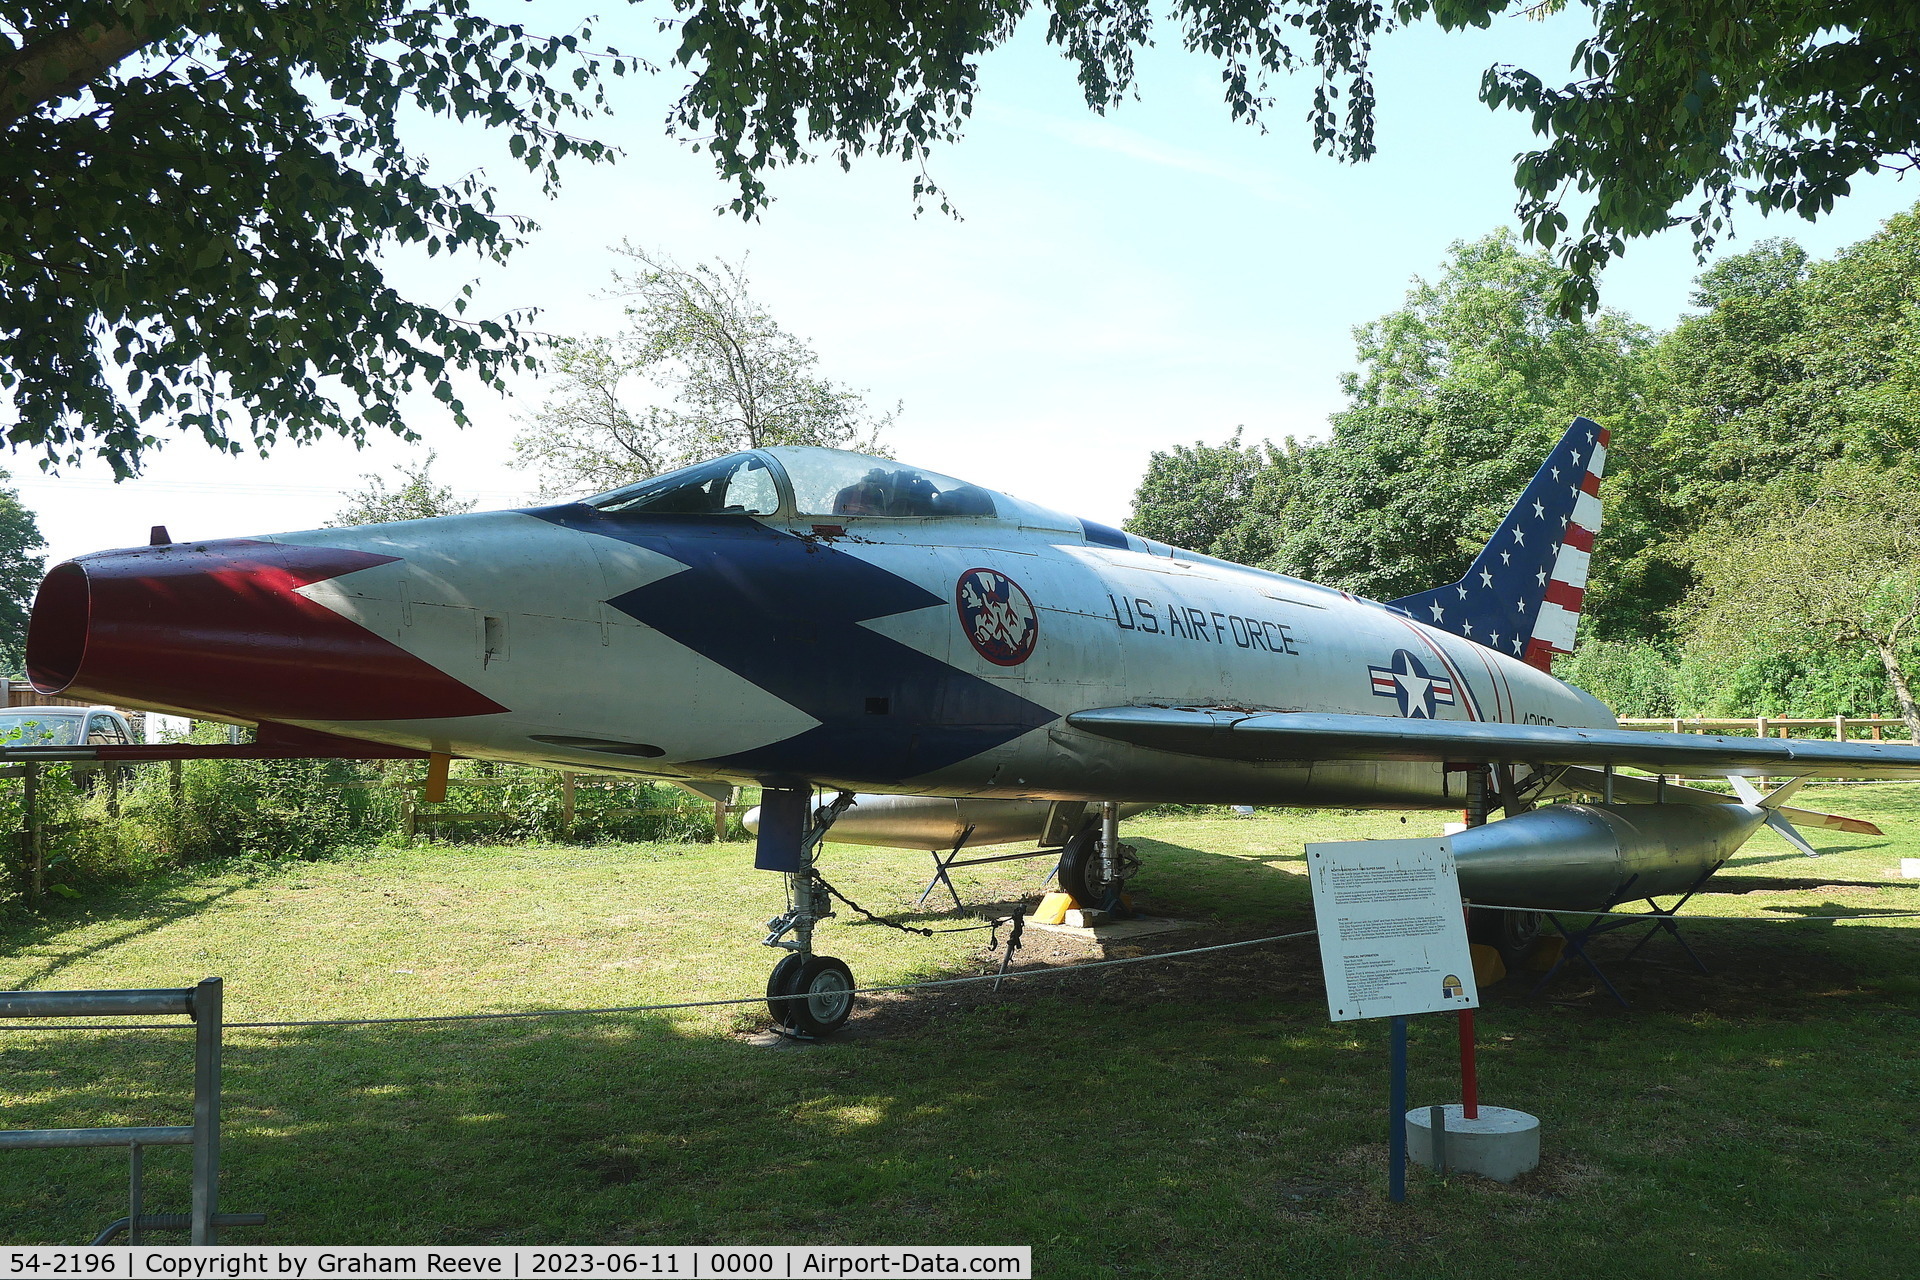 54-2196, 1956 North American F-100D Super Sabre C/N 223-76, Preserved at the Norfolk and Suffolk Aviation Museum, Flixton.